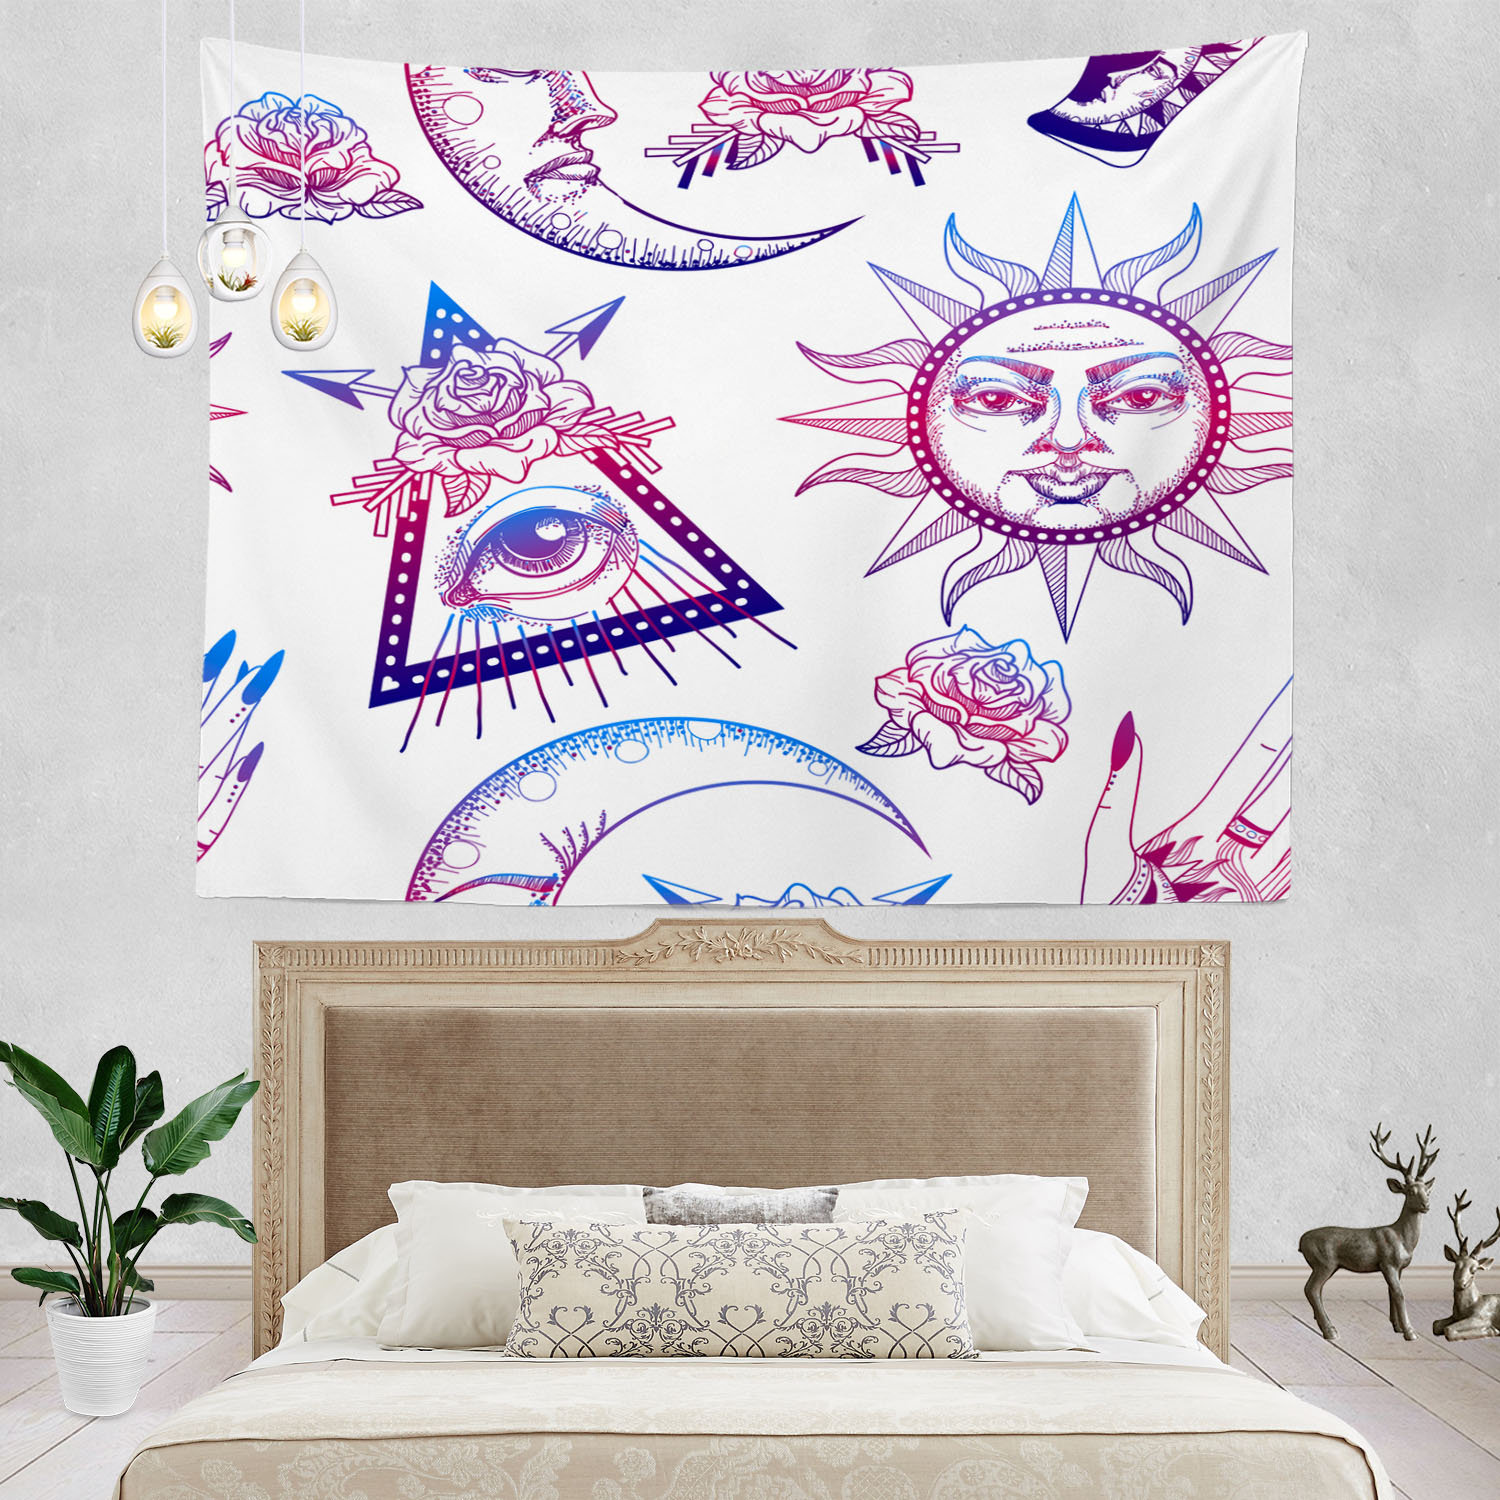 Sun Moon Tapestry Wall Hanging Psychedelic Hippie Mandala Bohemian Star Mystic Tapestry Night Sky Boho Decorative Polyester for Bedroom Living Rome Home Decor 51.2 x 59.1 Inches 